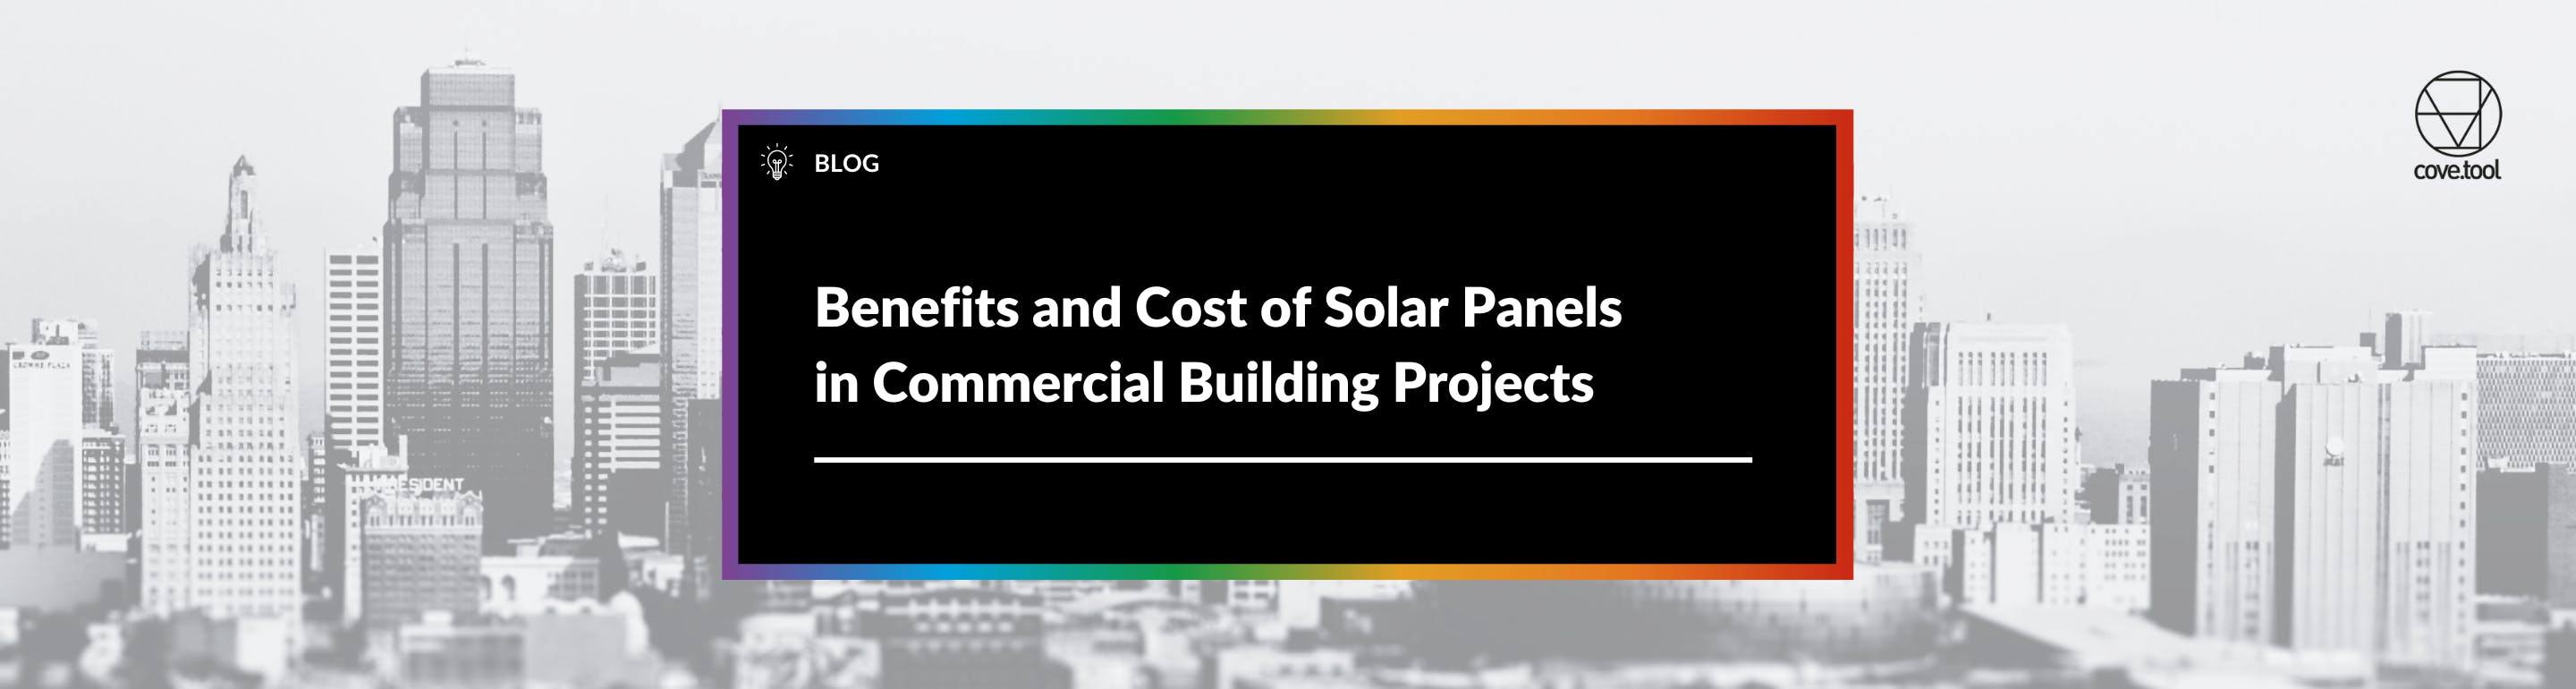 Benefits and Cost of Solar Panels in Commercial Building Projects 